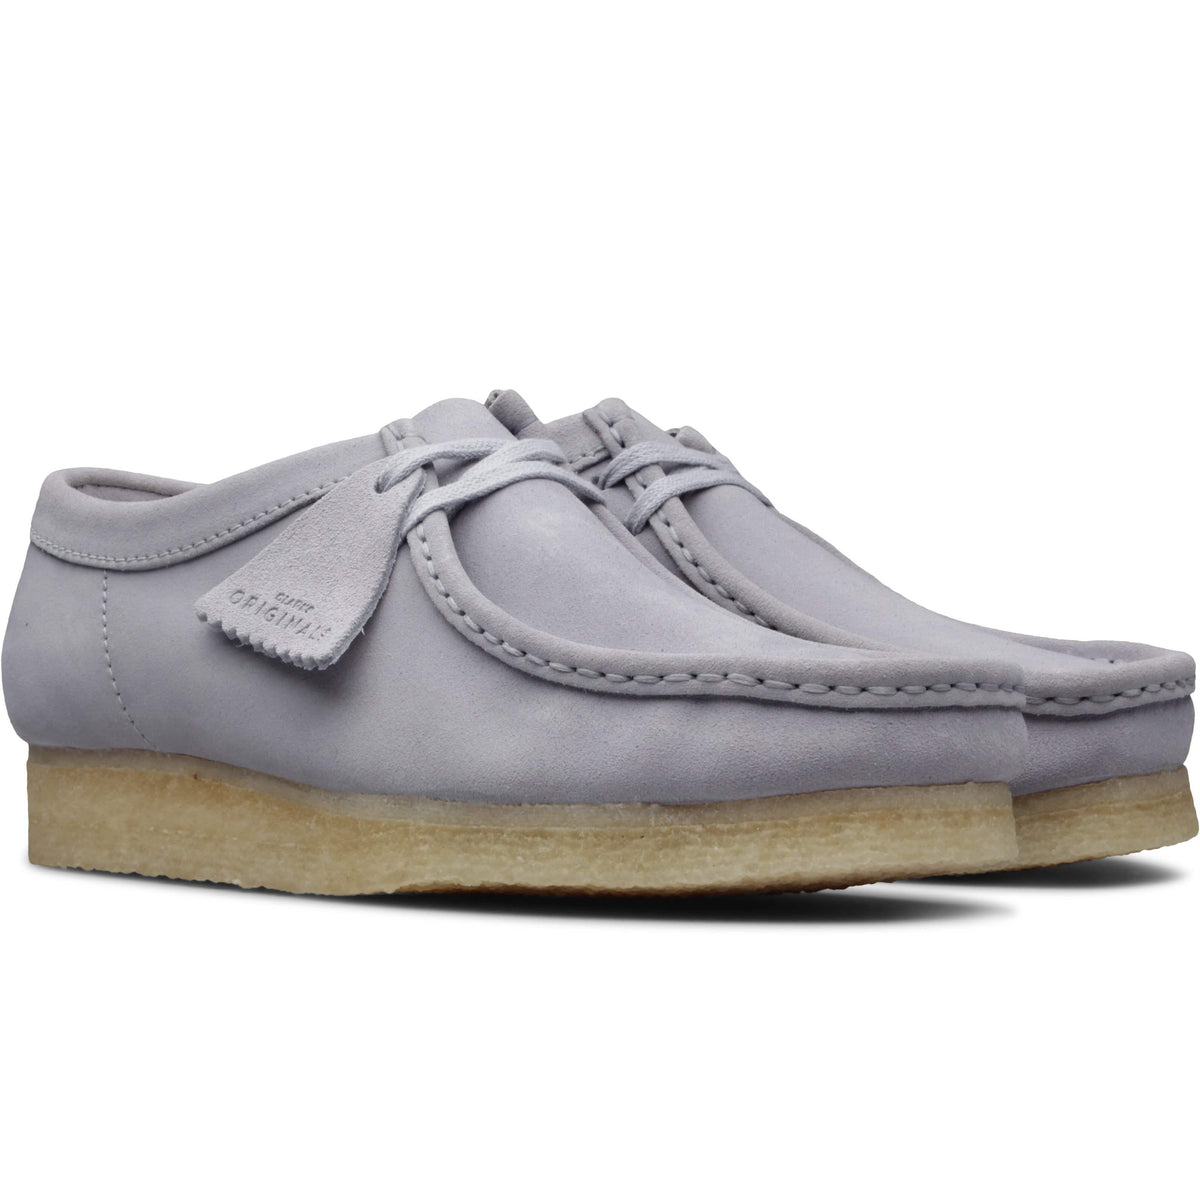 clarks wallabees cool Online shopping has never been as easy!